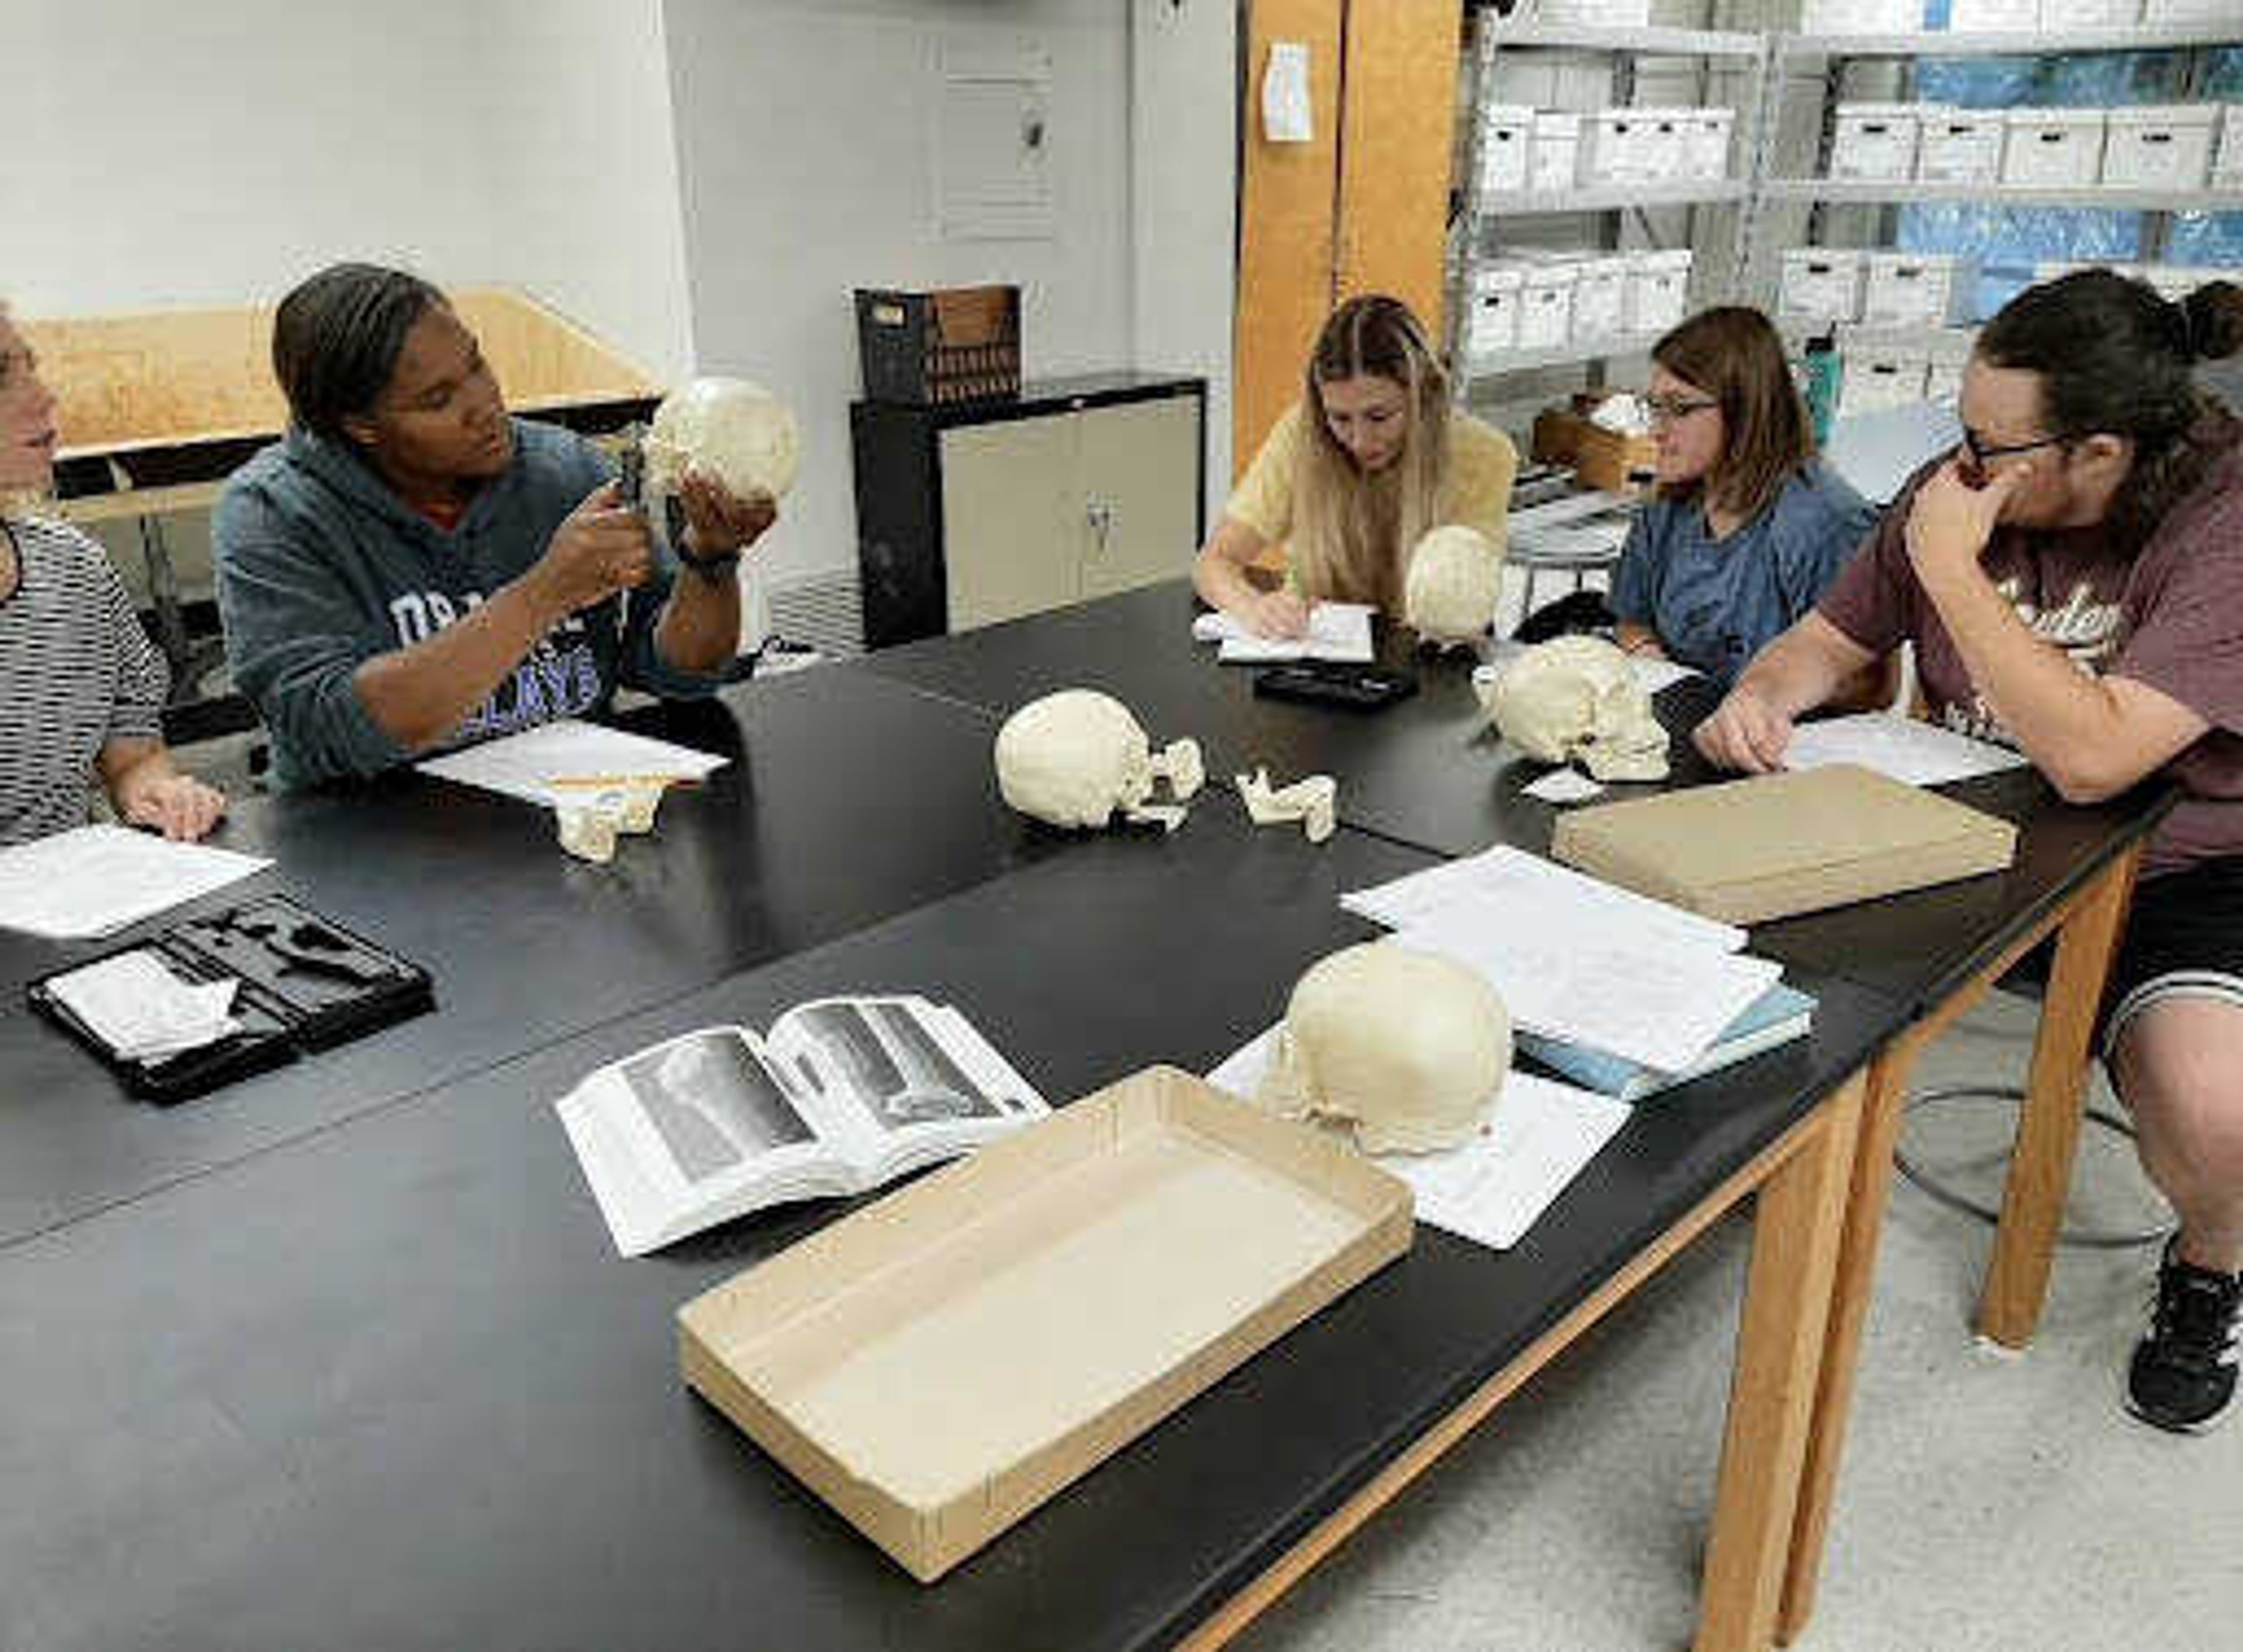 Anthropology students learn about human osteology with fake bones. Understanding bone placement and structure is a crucial part of forensic anthropology studies according to anthropology professor Jennifer Bengston. 